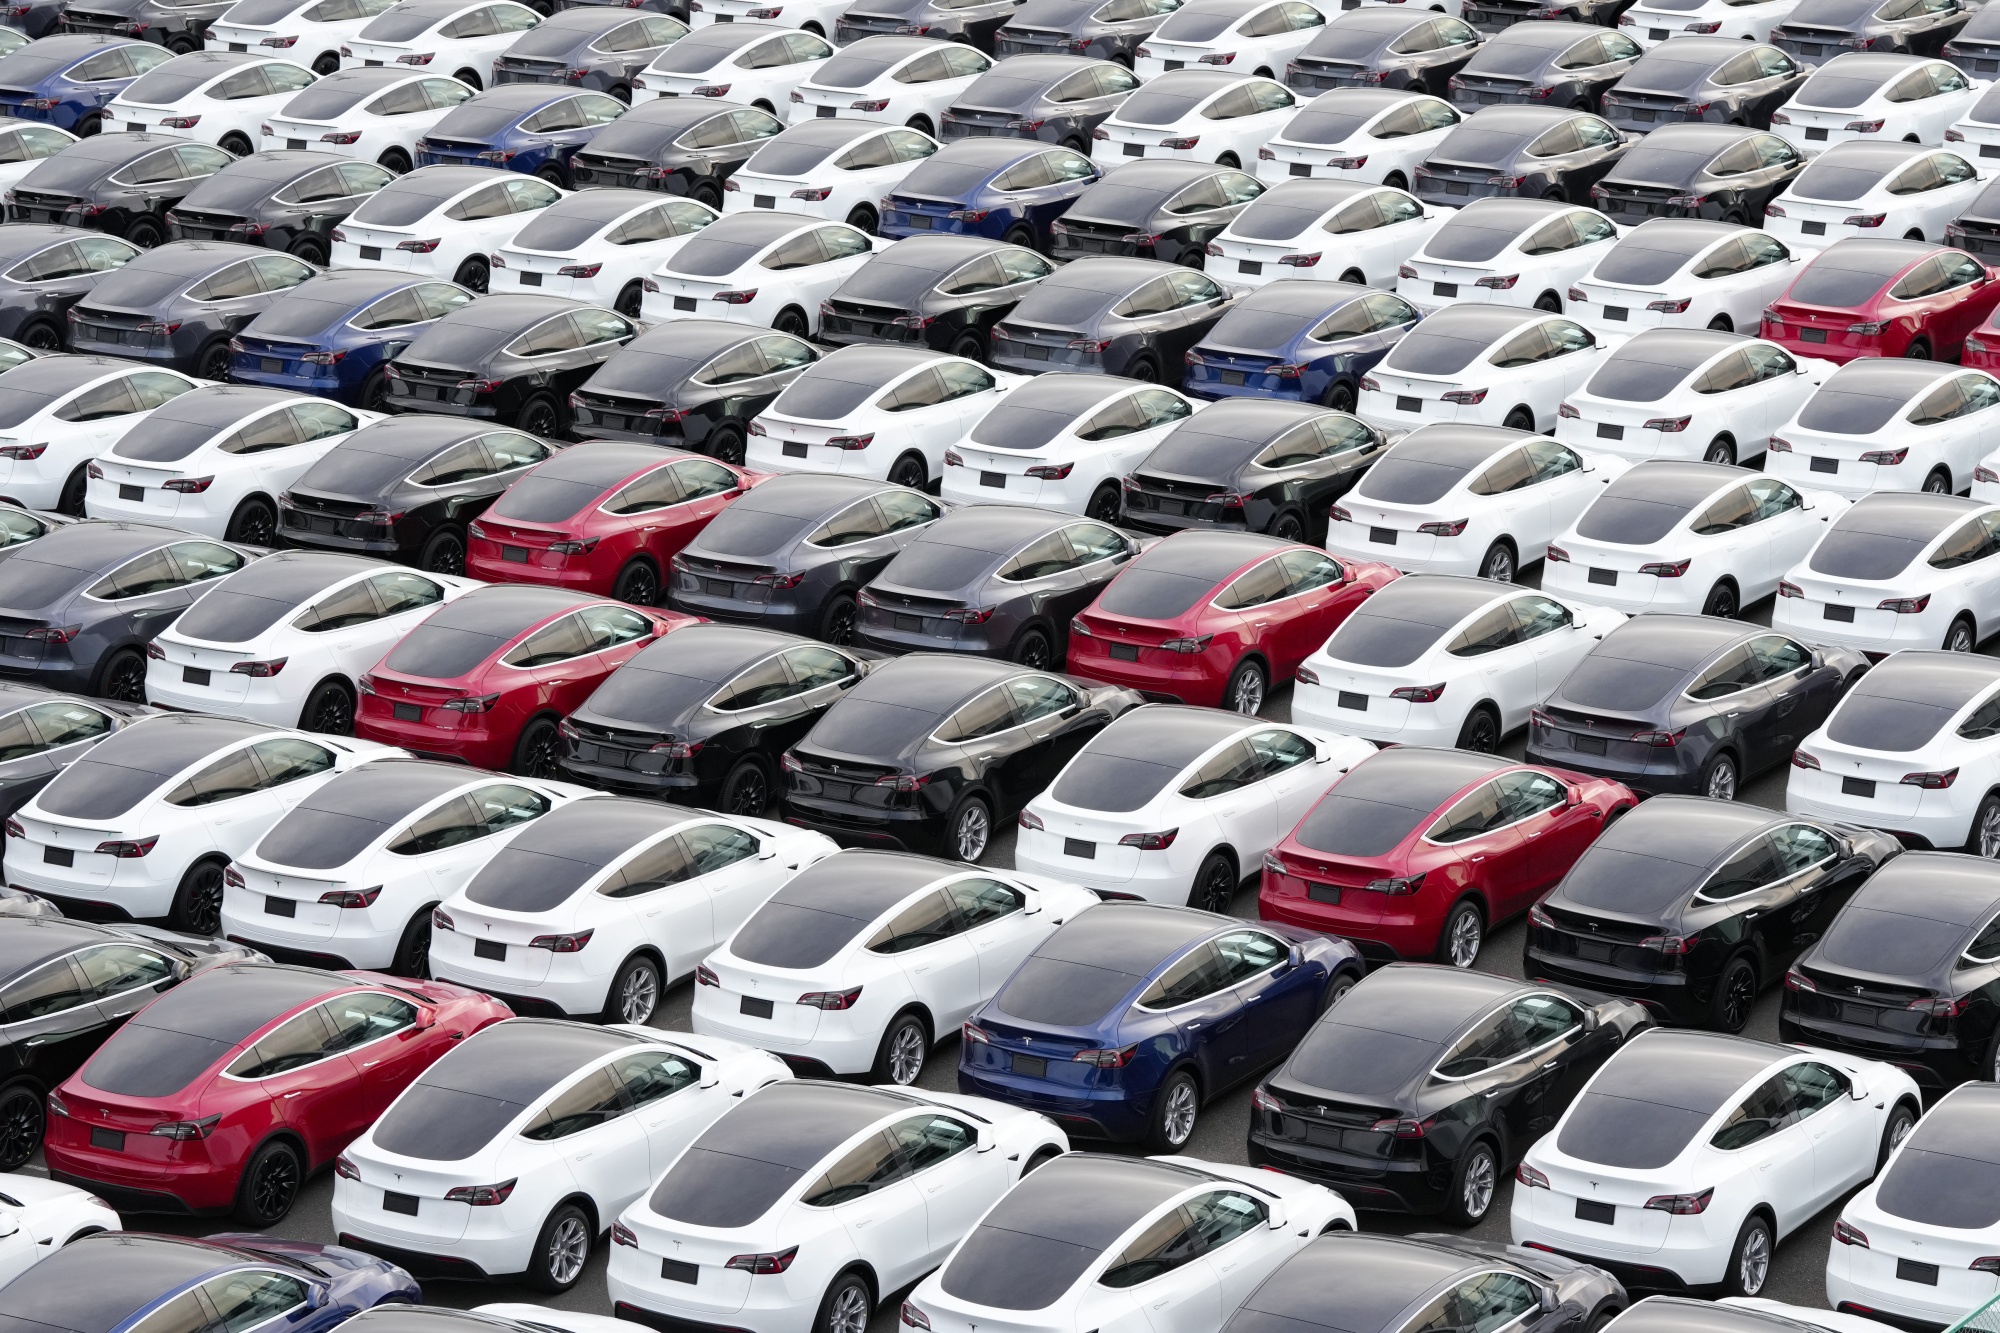 Tesla vehicles parked&nbsp;at the Port of Yokohama in Japan on Oct. 28, days after CEO Elon Musk predicted an “epic” year-end.